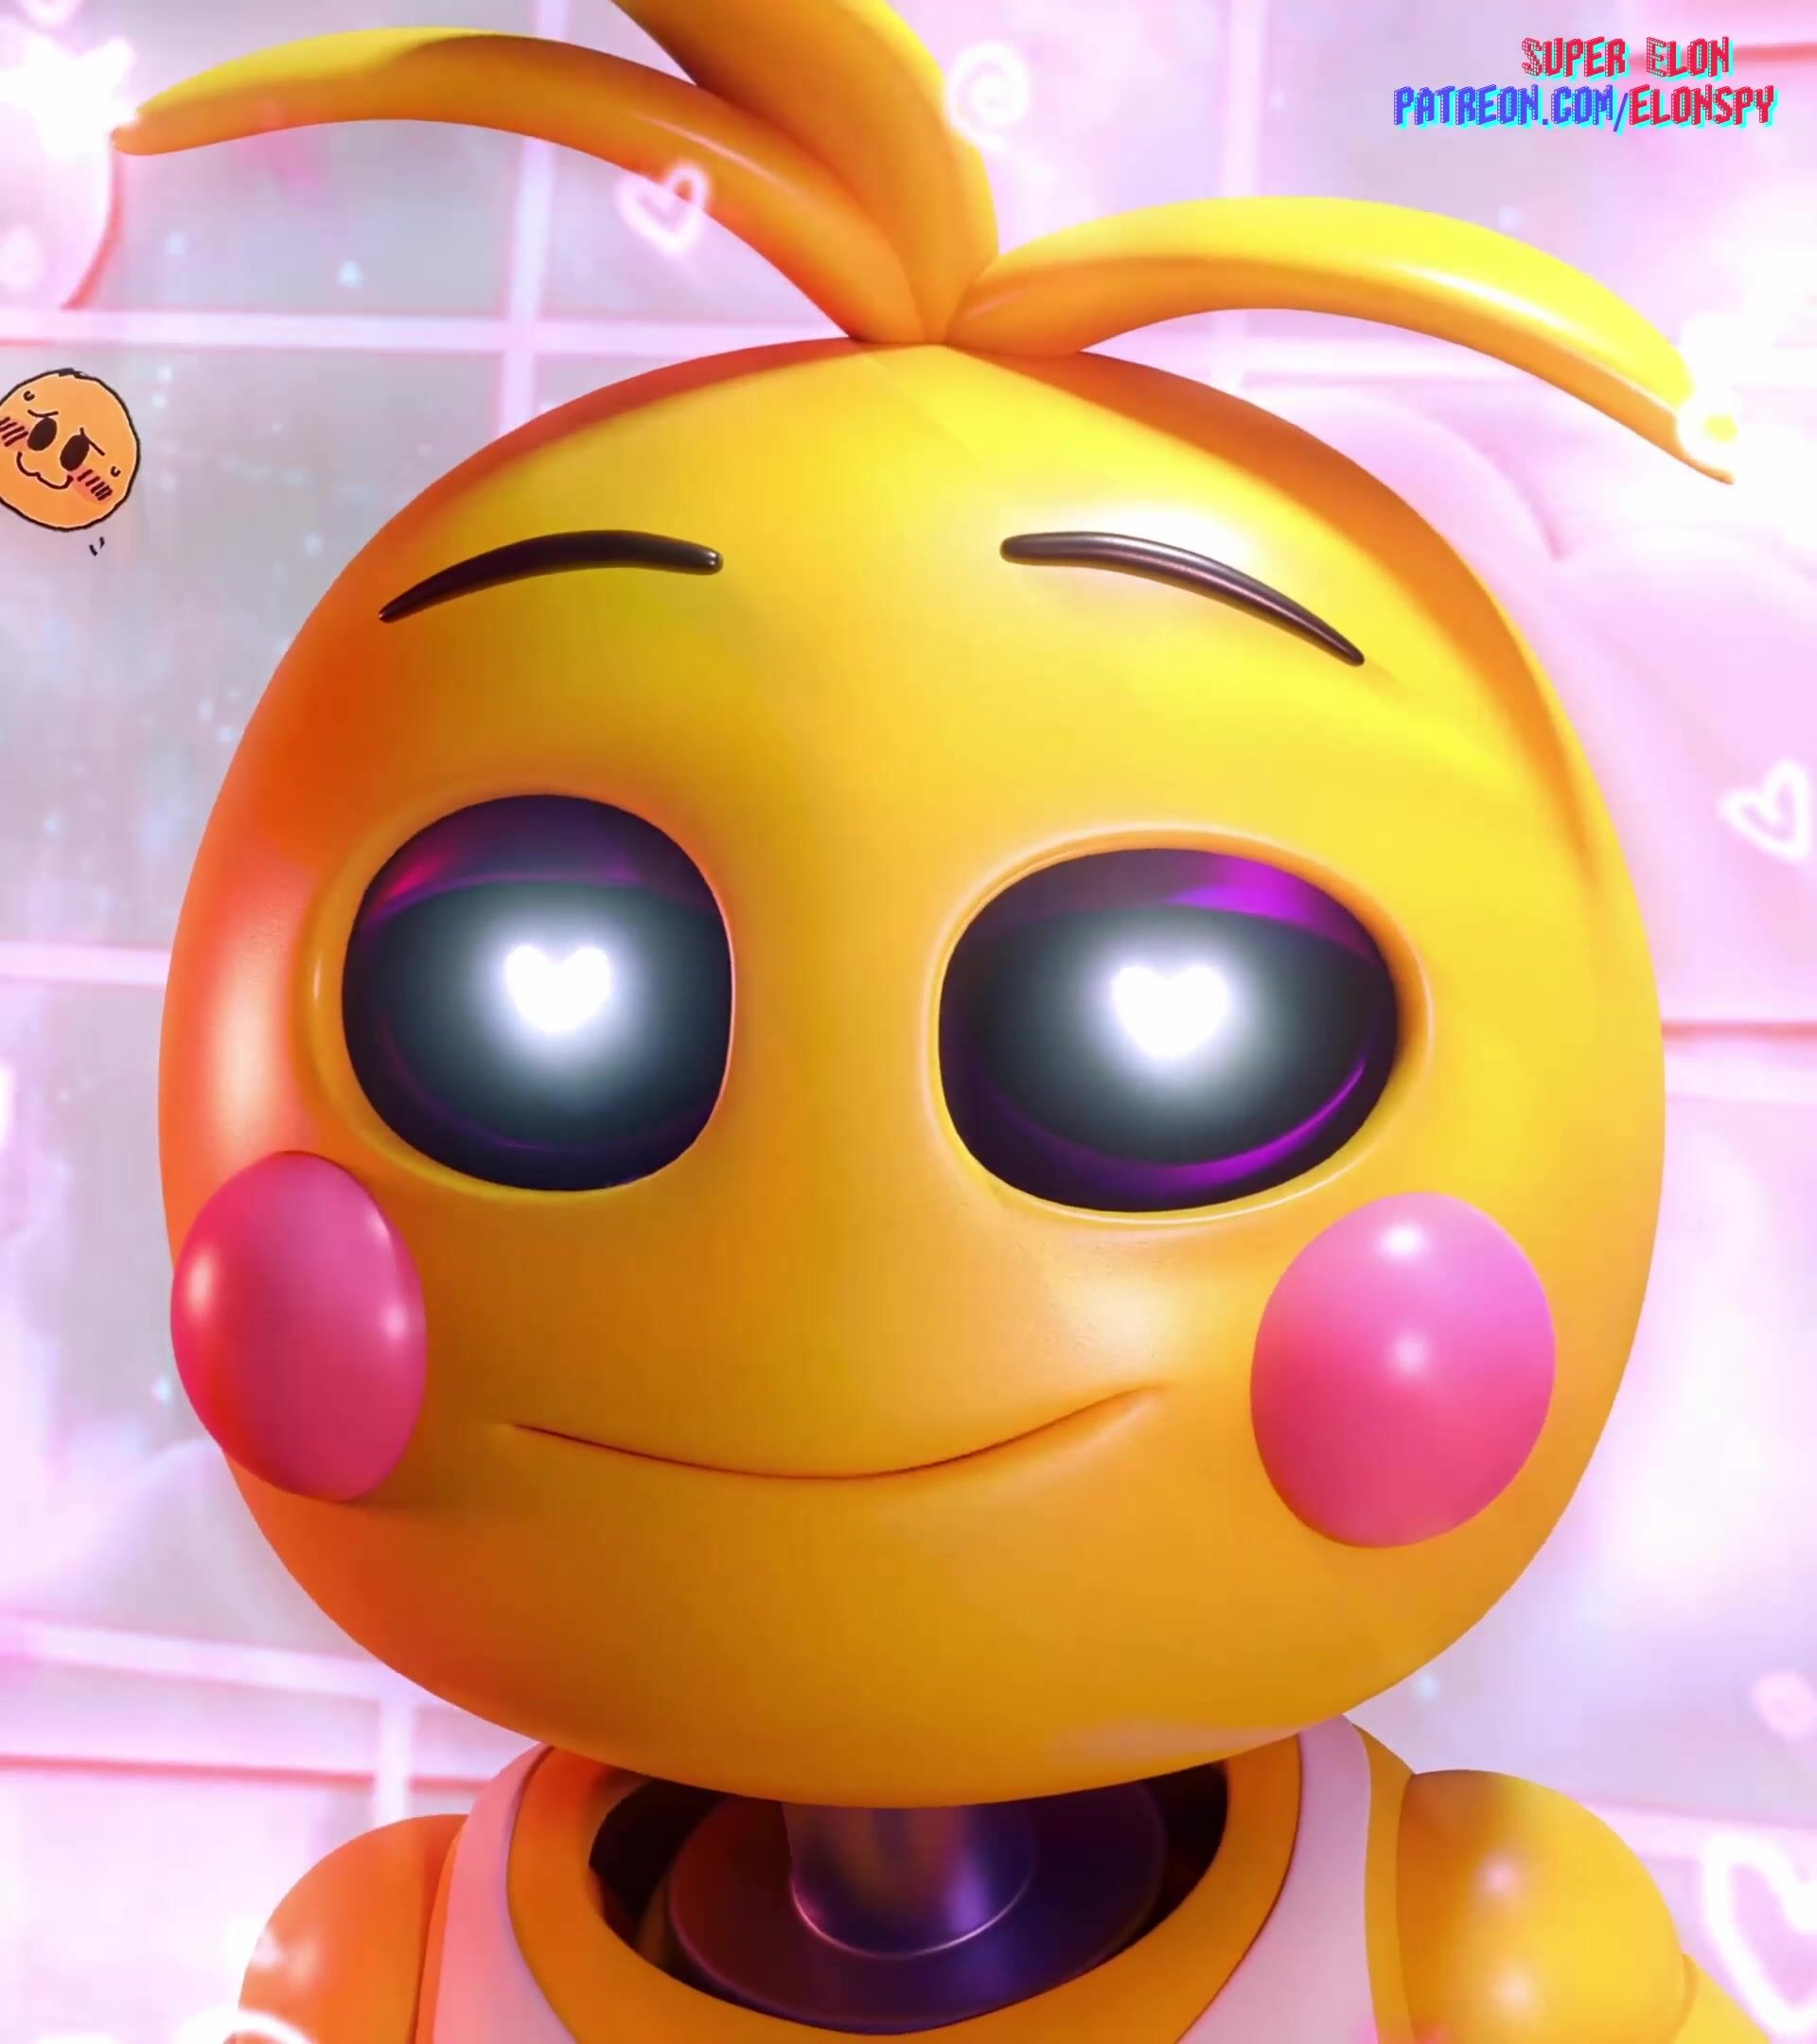 Fnaf toy chica rule 34